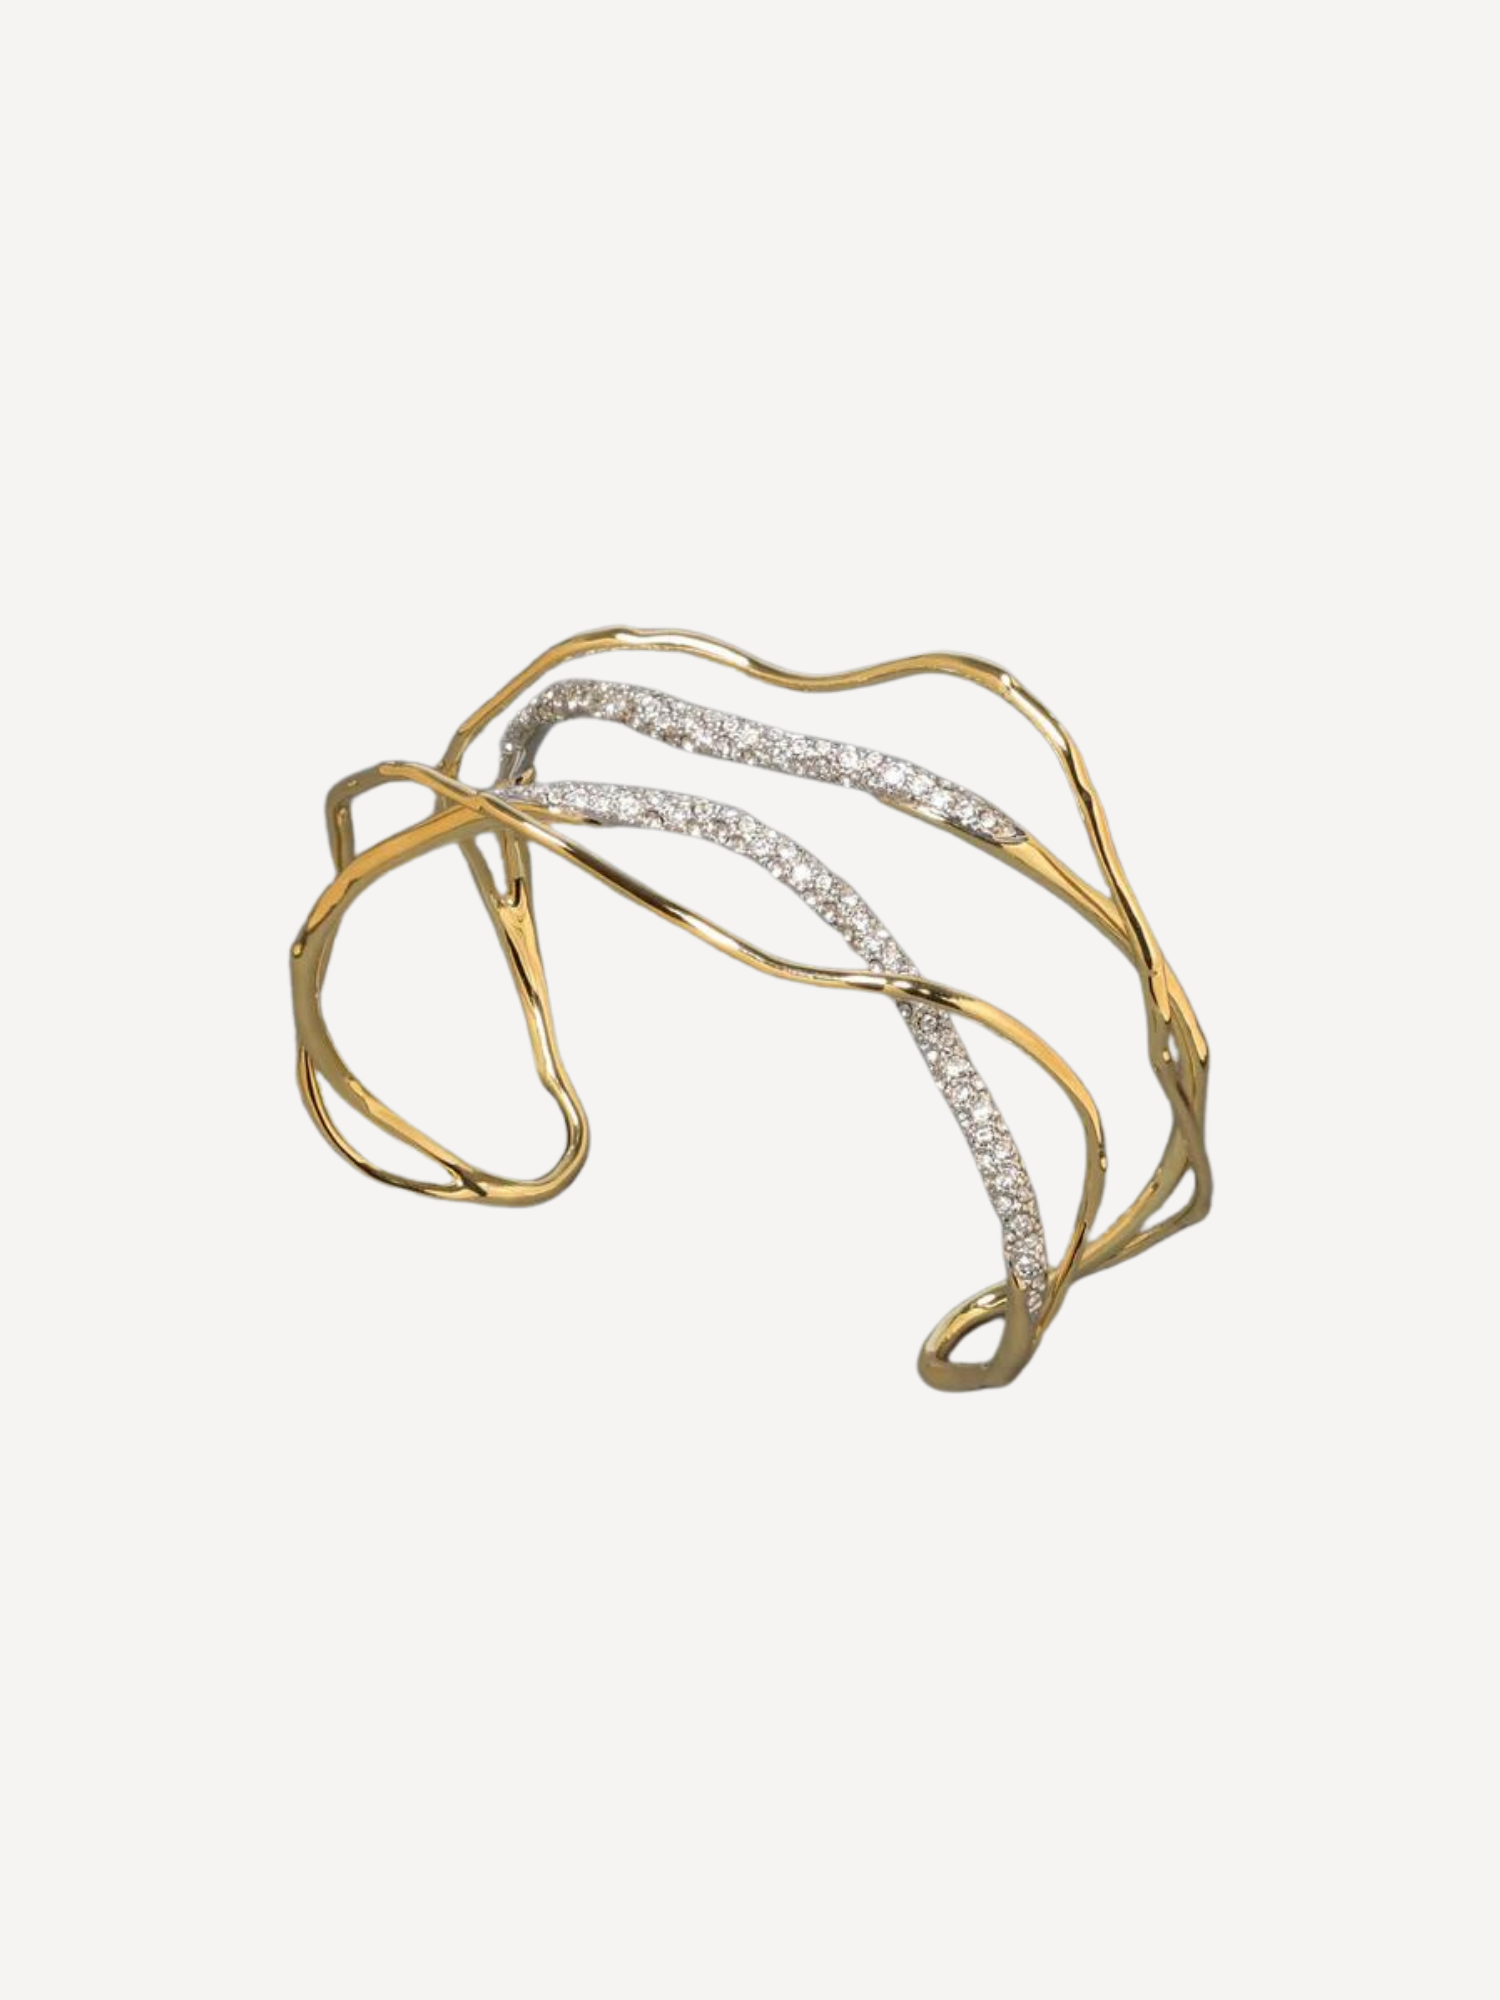 Solanales Crystal Lines Cuff Bracelet